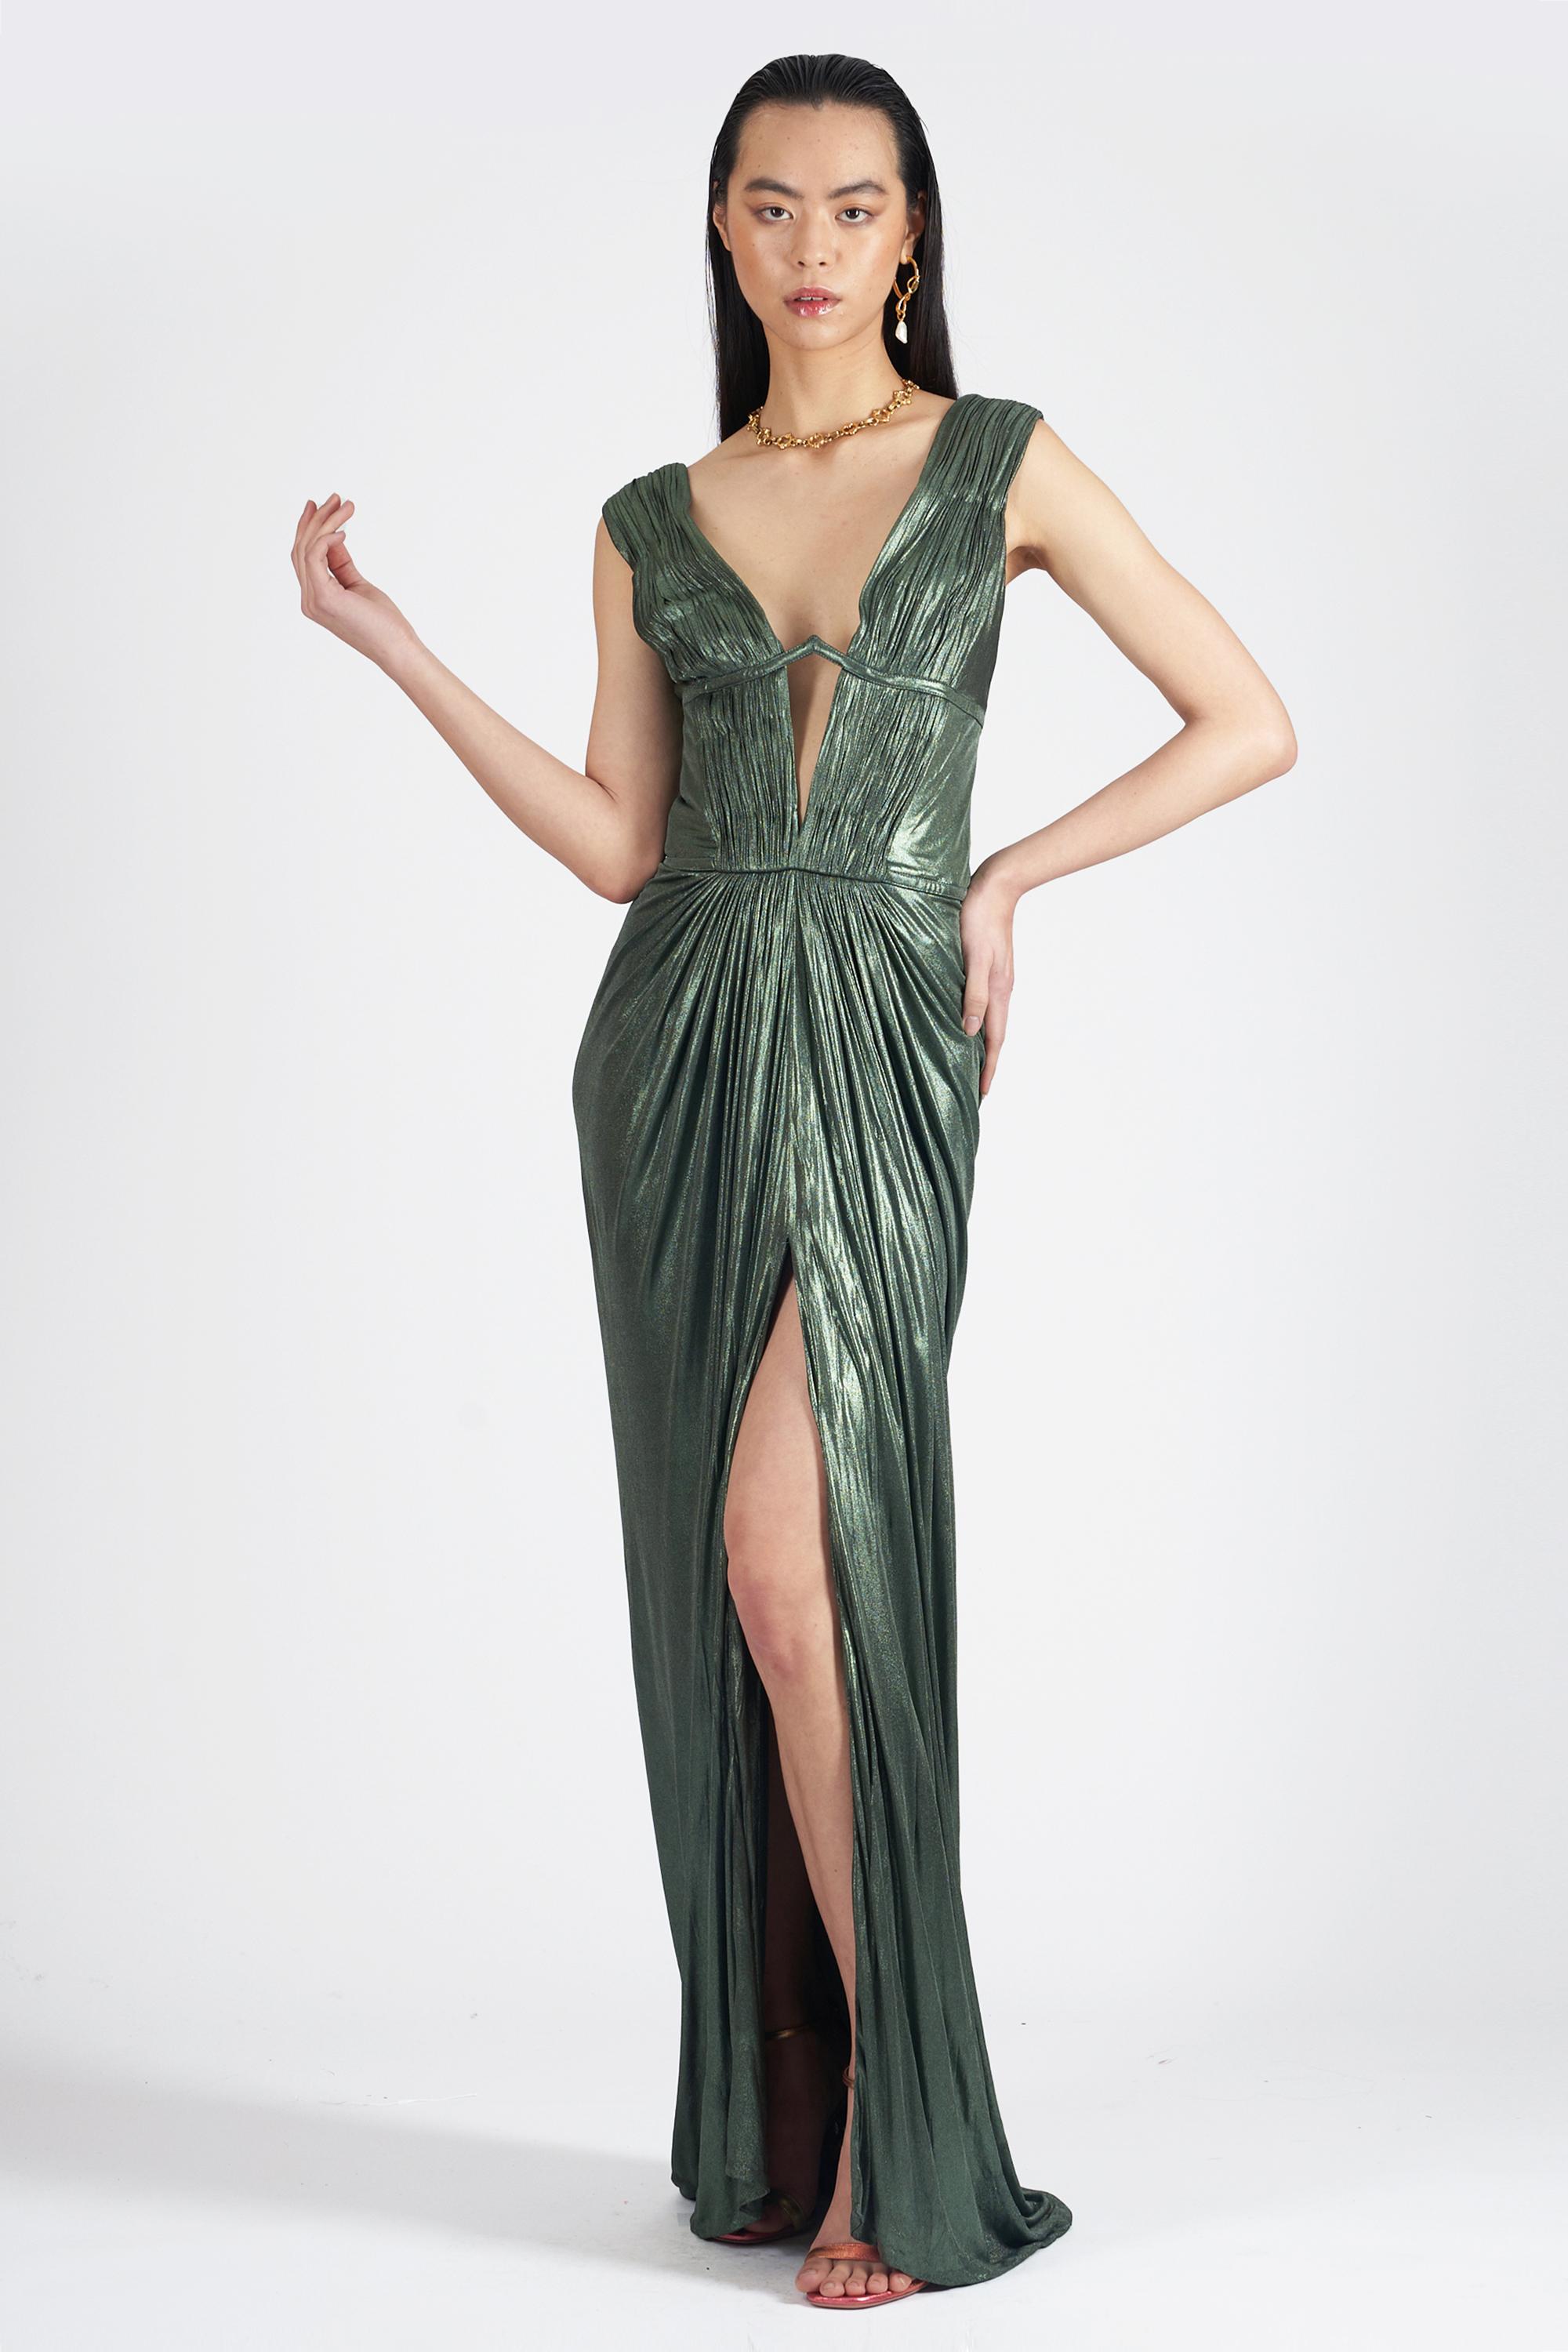 Roberto Cavalli F/W 2007 Metallic Gown In Excellent Condition For Sale In London, GB